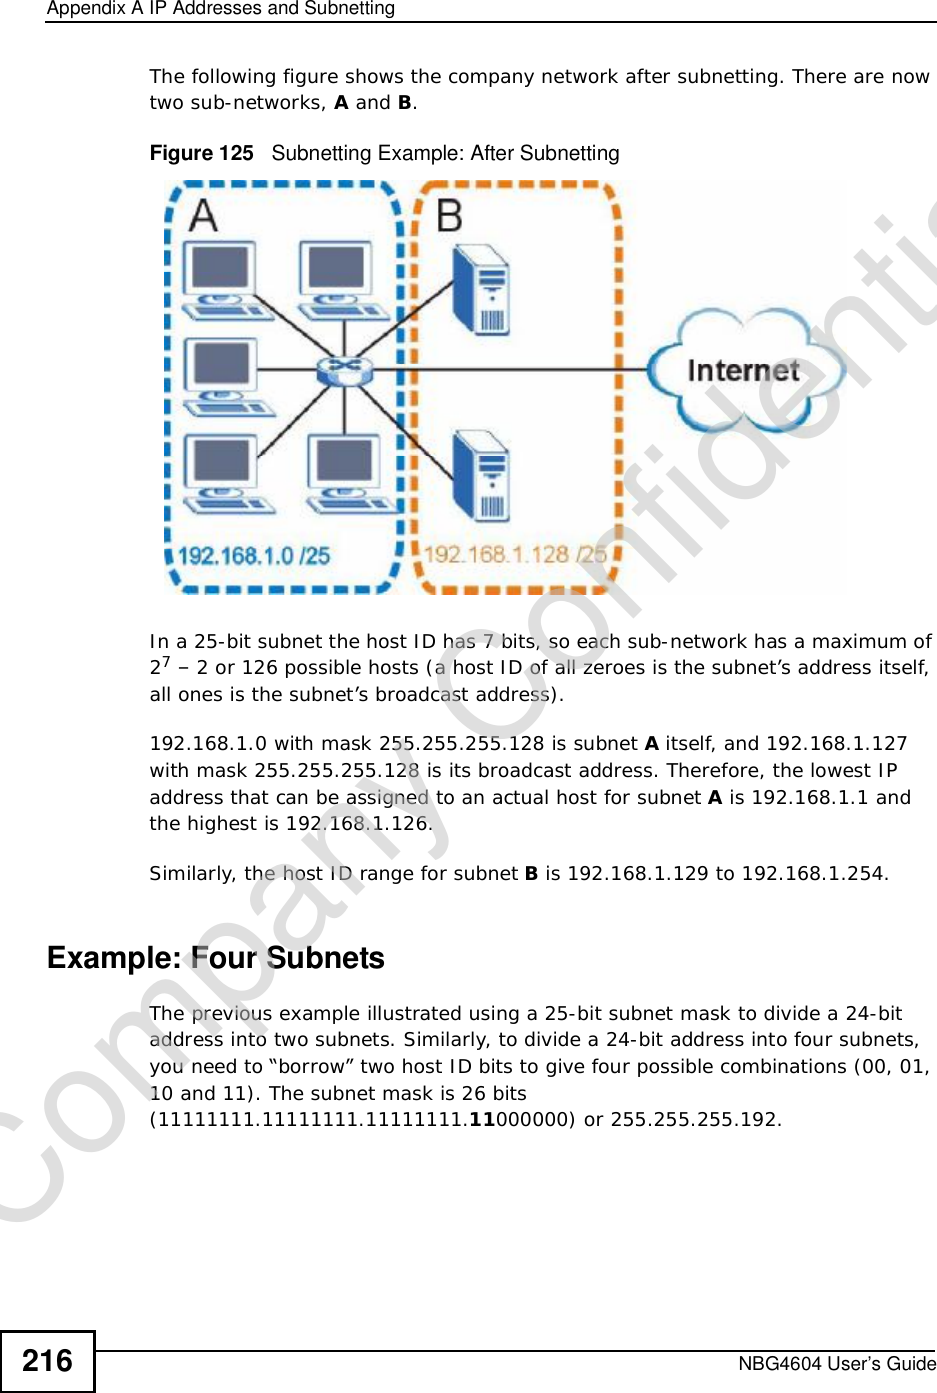 Appendix AIP Addresses and SubnettingNBG4604 User’s Guide216The following figure shows the company network after subnetting. There are now two sub-networks, A and B.Figure 125   Subnetting Example: After SubnettingIn a 25-bit subnet the host ID has 7 bits, so each sub-network has a maximum of 27 – 2 or 126 possible hosts (a host ID of all zeroes is the subnet’s address itself, all ones is the subnet’s broadcast address).192.168.1.0 with mask 255.255.255.128 is subnet A itself, and 192.168.1.127 with mask 255.255.255.128 is its broadcast address. Therefore, the lowest IP address that can be assigned to an actual host for subnet A is 192.168.1.1 and the highest is 192.168.1.126. Similarly, the host ID range for subnet B is 192.168.1.129 to 192.168.1.254.Example: Four Subnets The previous example illustrated using a 25-bit subnet mask to divide a 24-bit address into two subnets. Similarly, to divide a 24-bit address into four subnets, you need to “borrow” two host ID bits to give four possible combinations (00, 01, 10 and 11). The subnet mask is 26 bits (11111111.11111111.11111111.11000000) or 255.255.255.192. Company Confidential